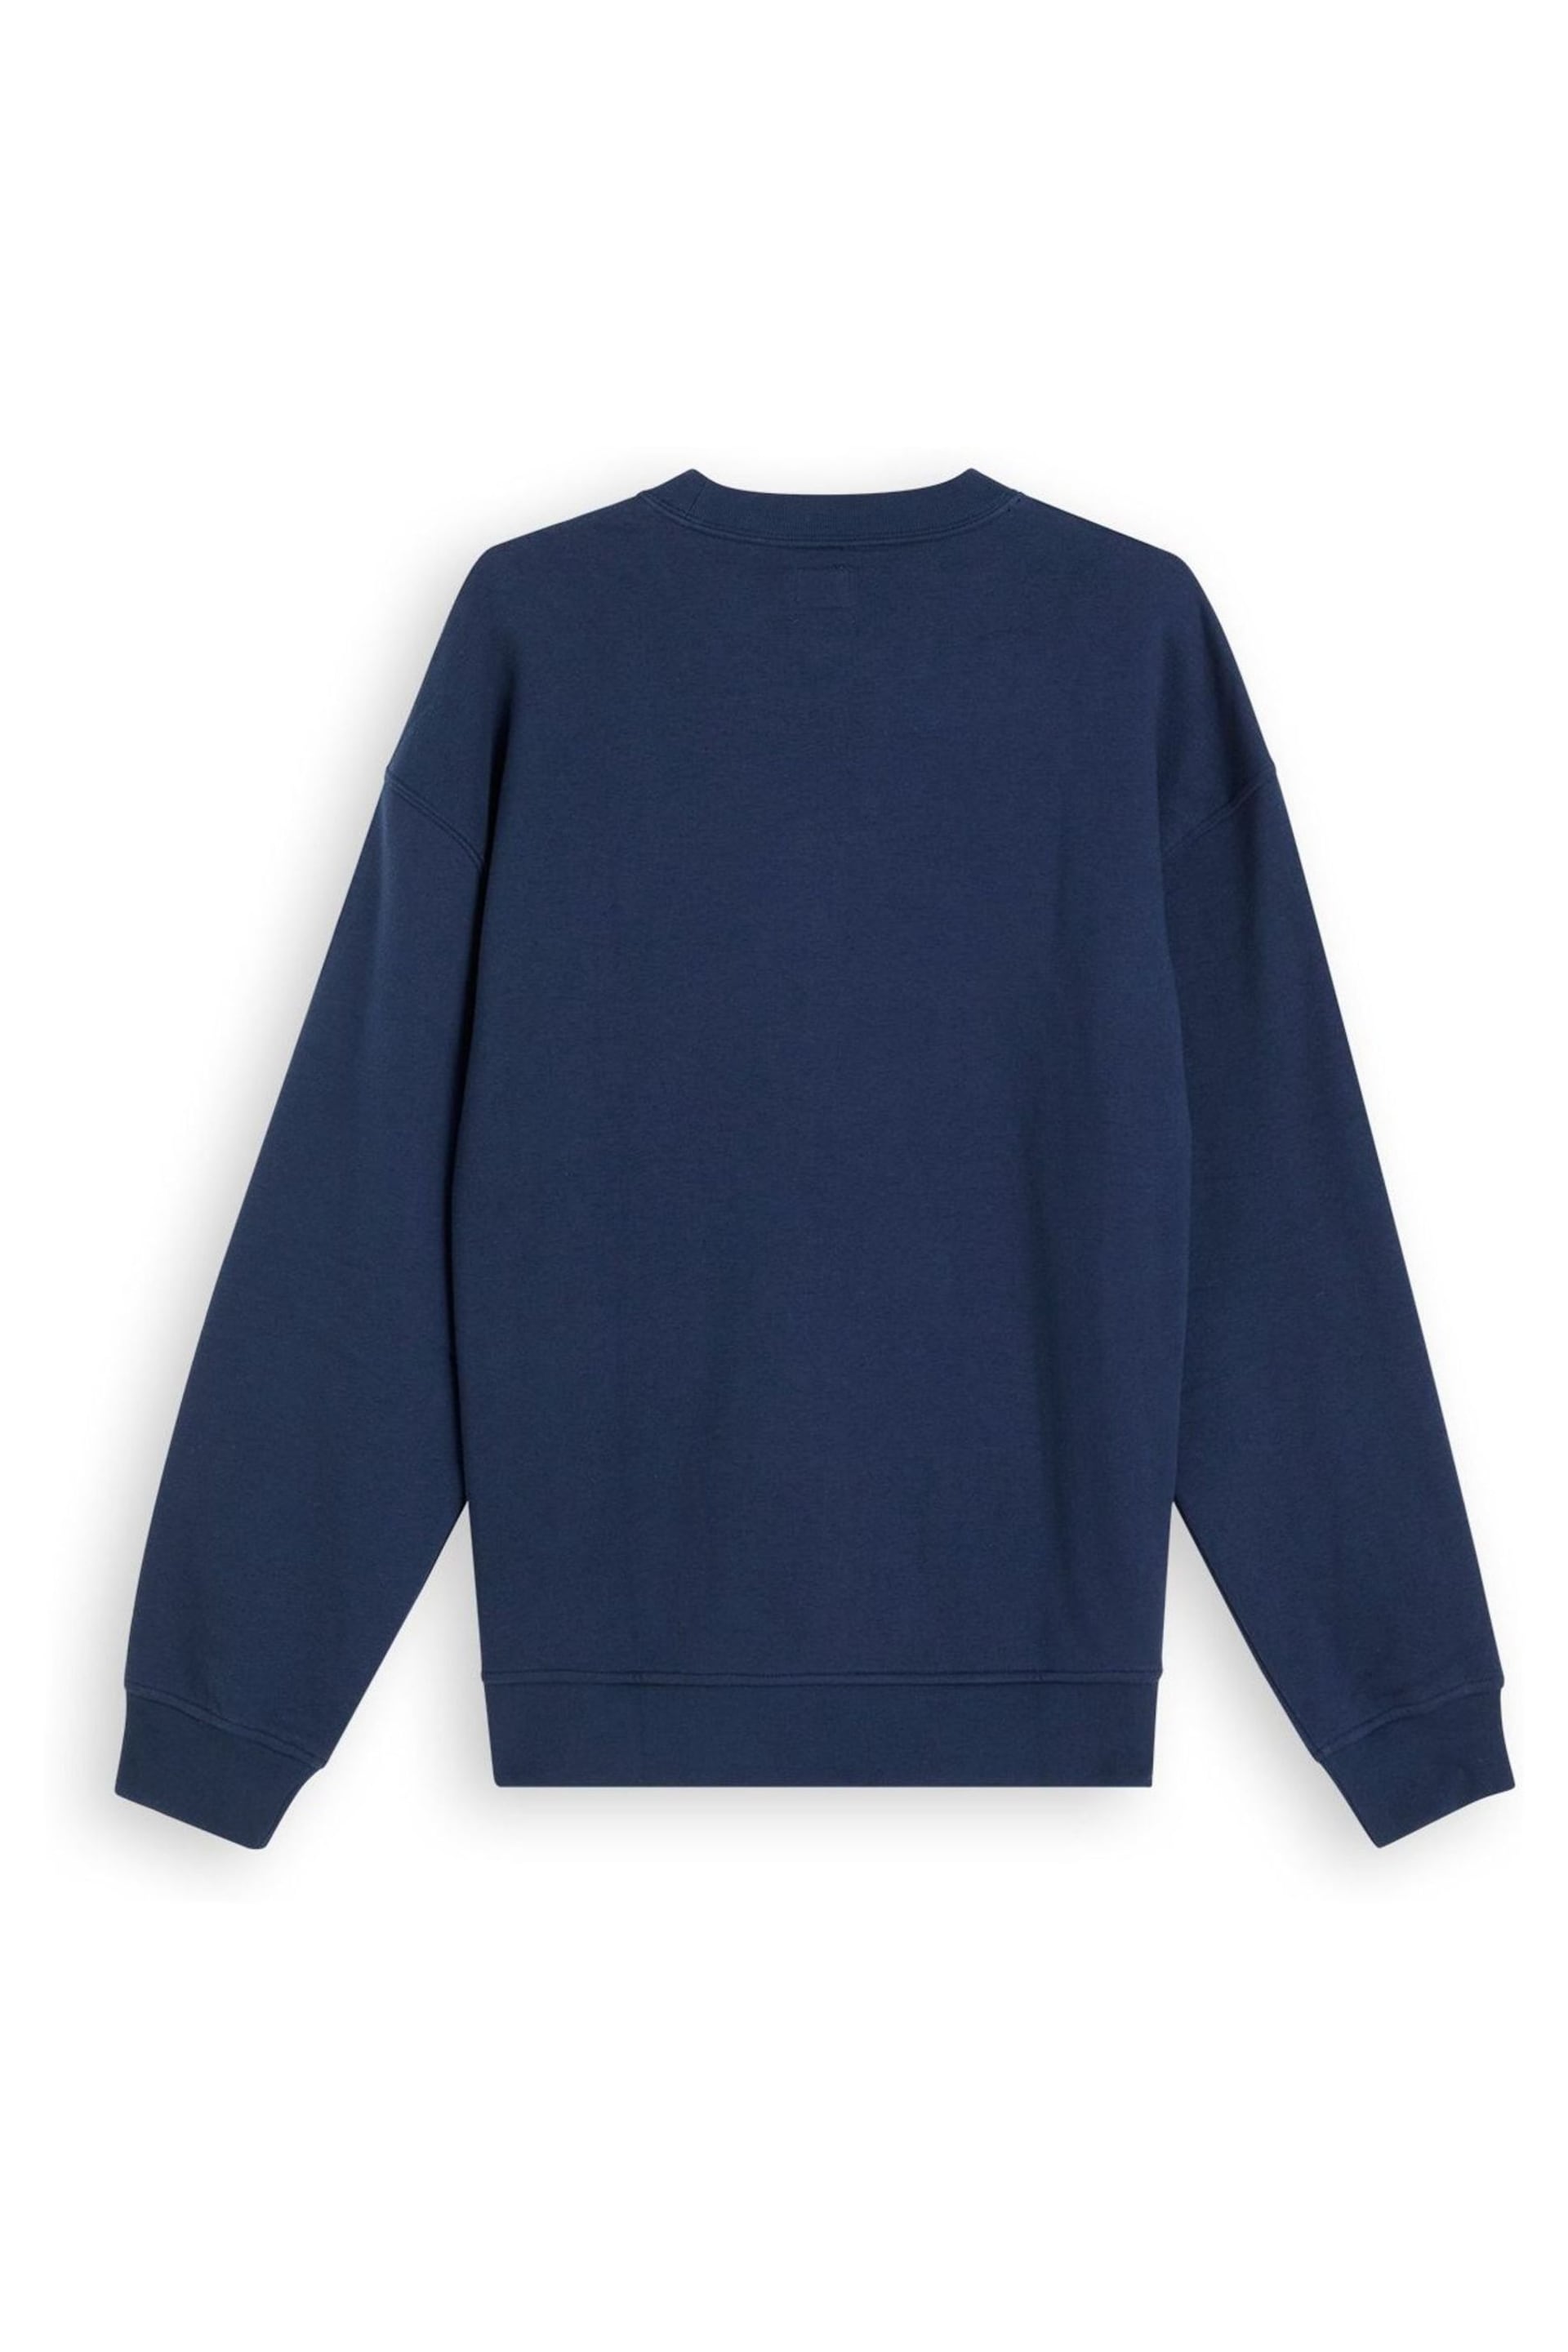 Levi's® Blue Relaxed Baby Tab  Sweatshirt - Image 4 of 5